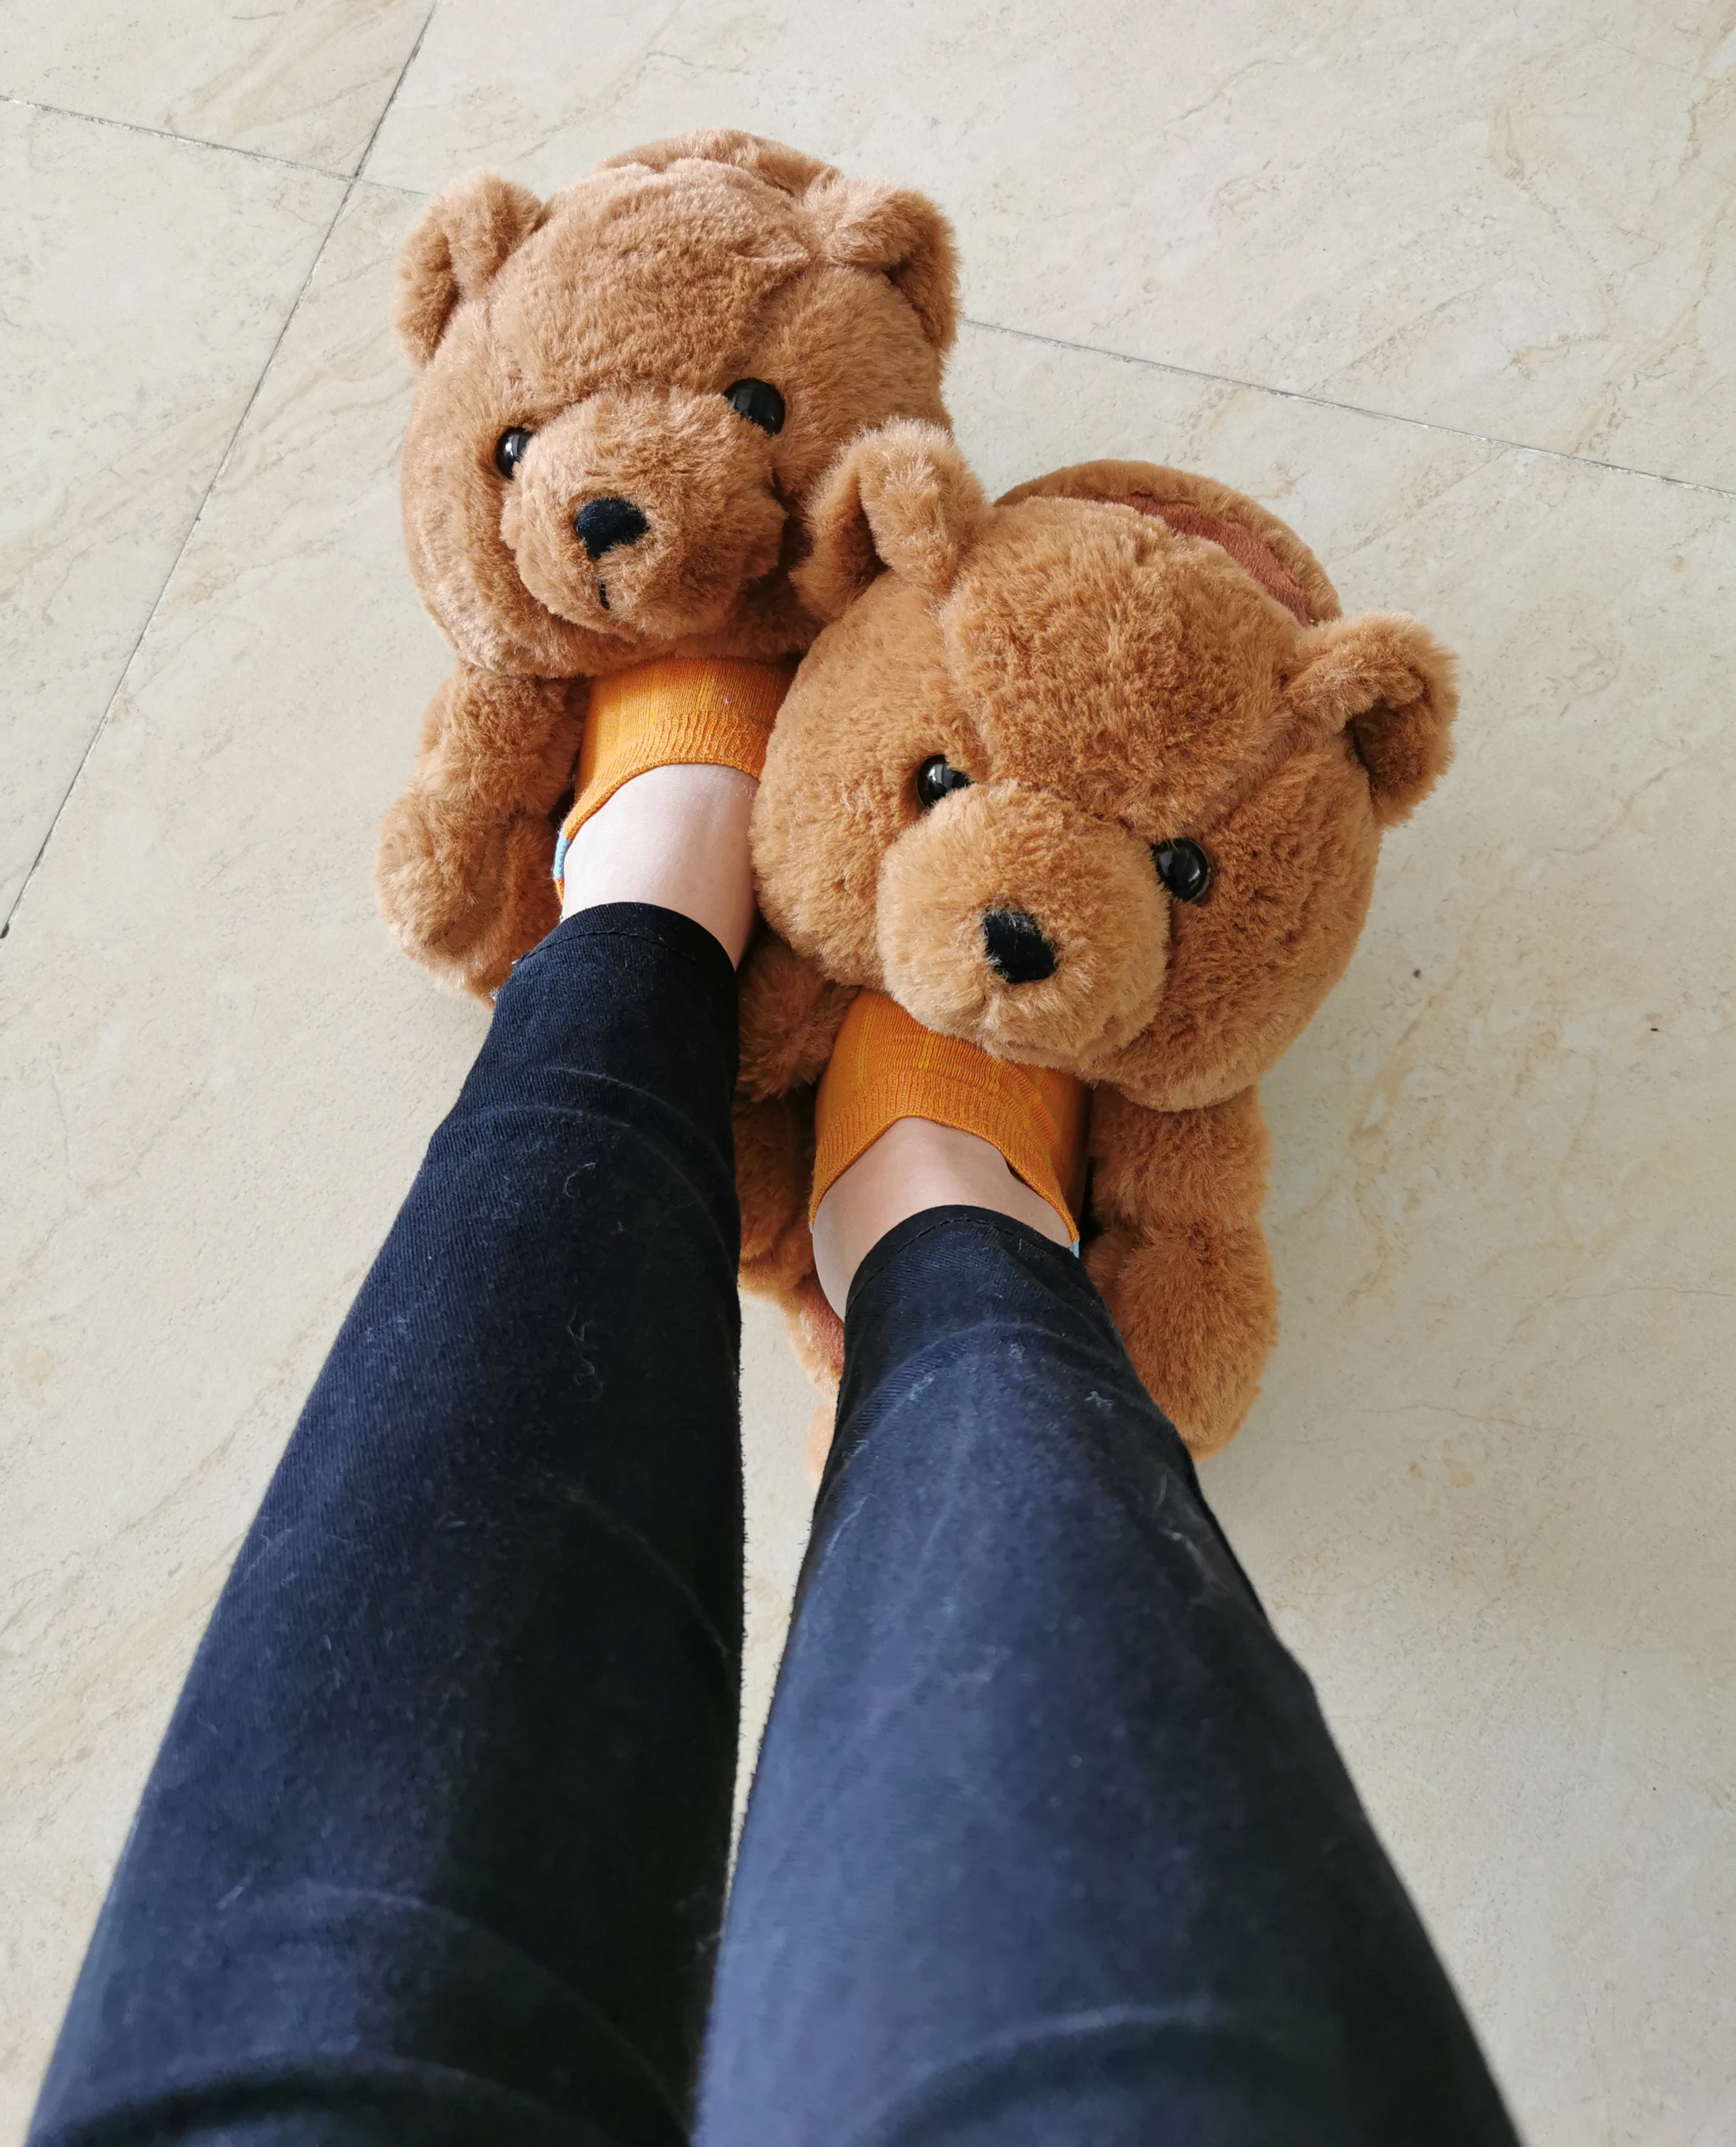 

2021 New Arrivals Kids Bear Slippers Close Toe Indoor Outdoor Teddy Bear Slides Soft Warm Furry Bear Slippers For Girls, As picture show or customized